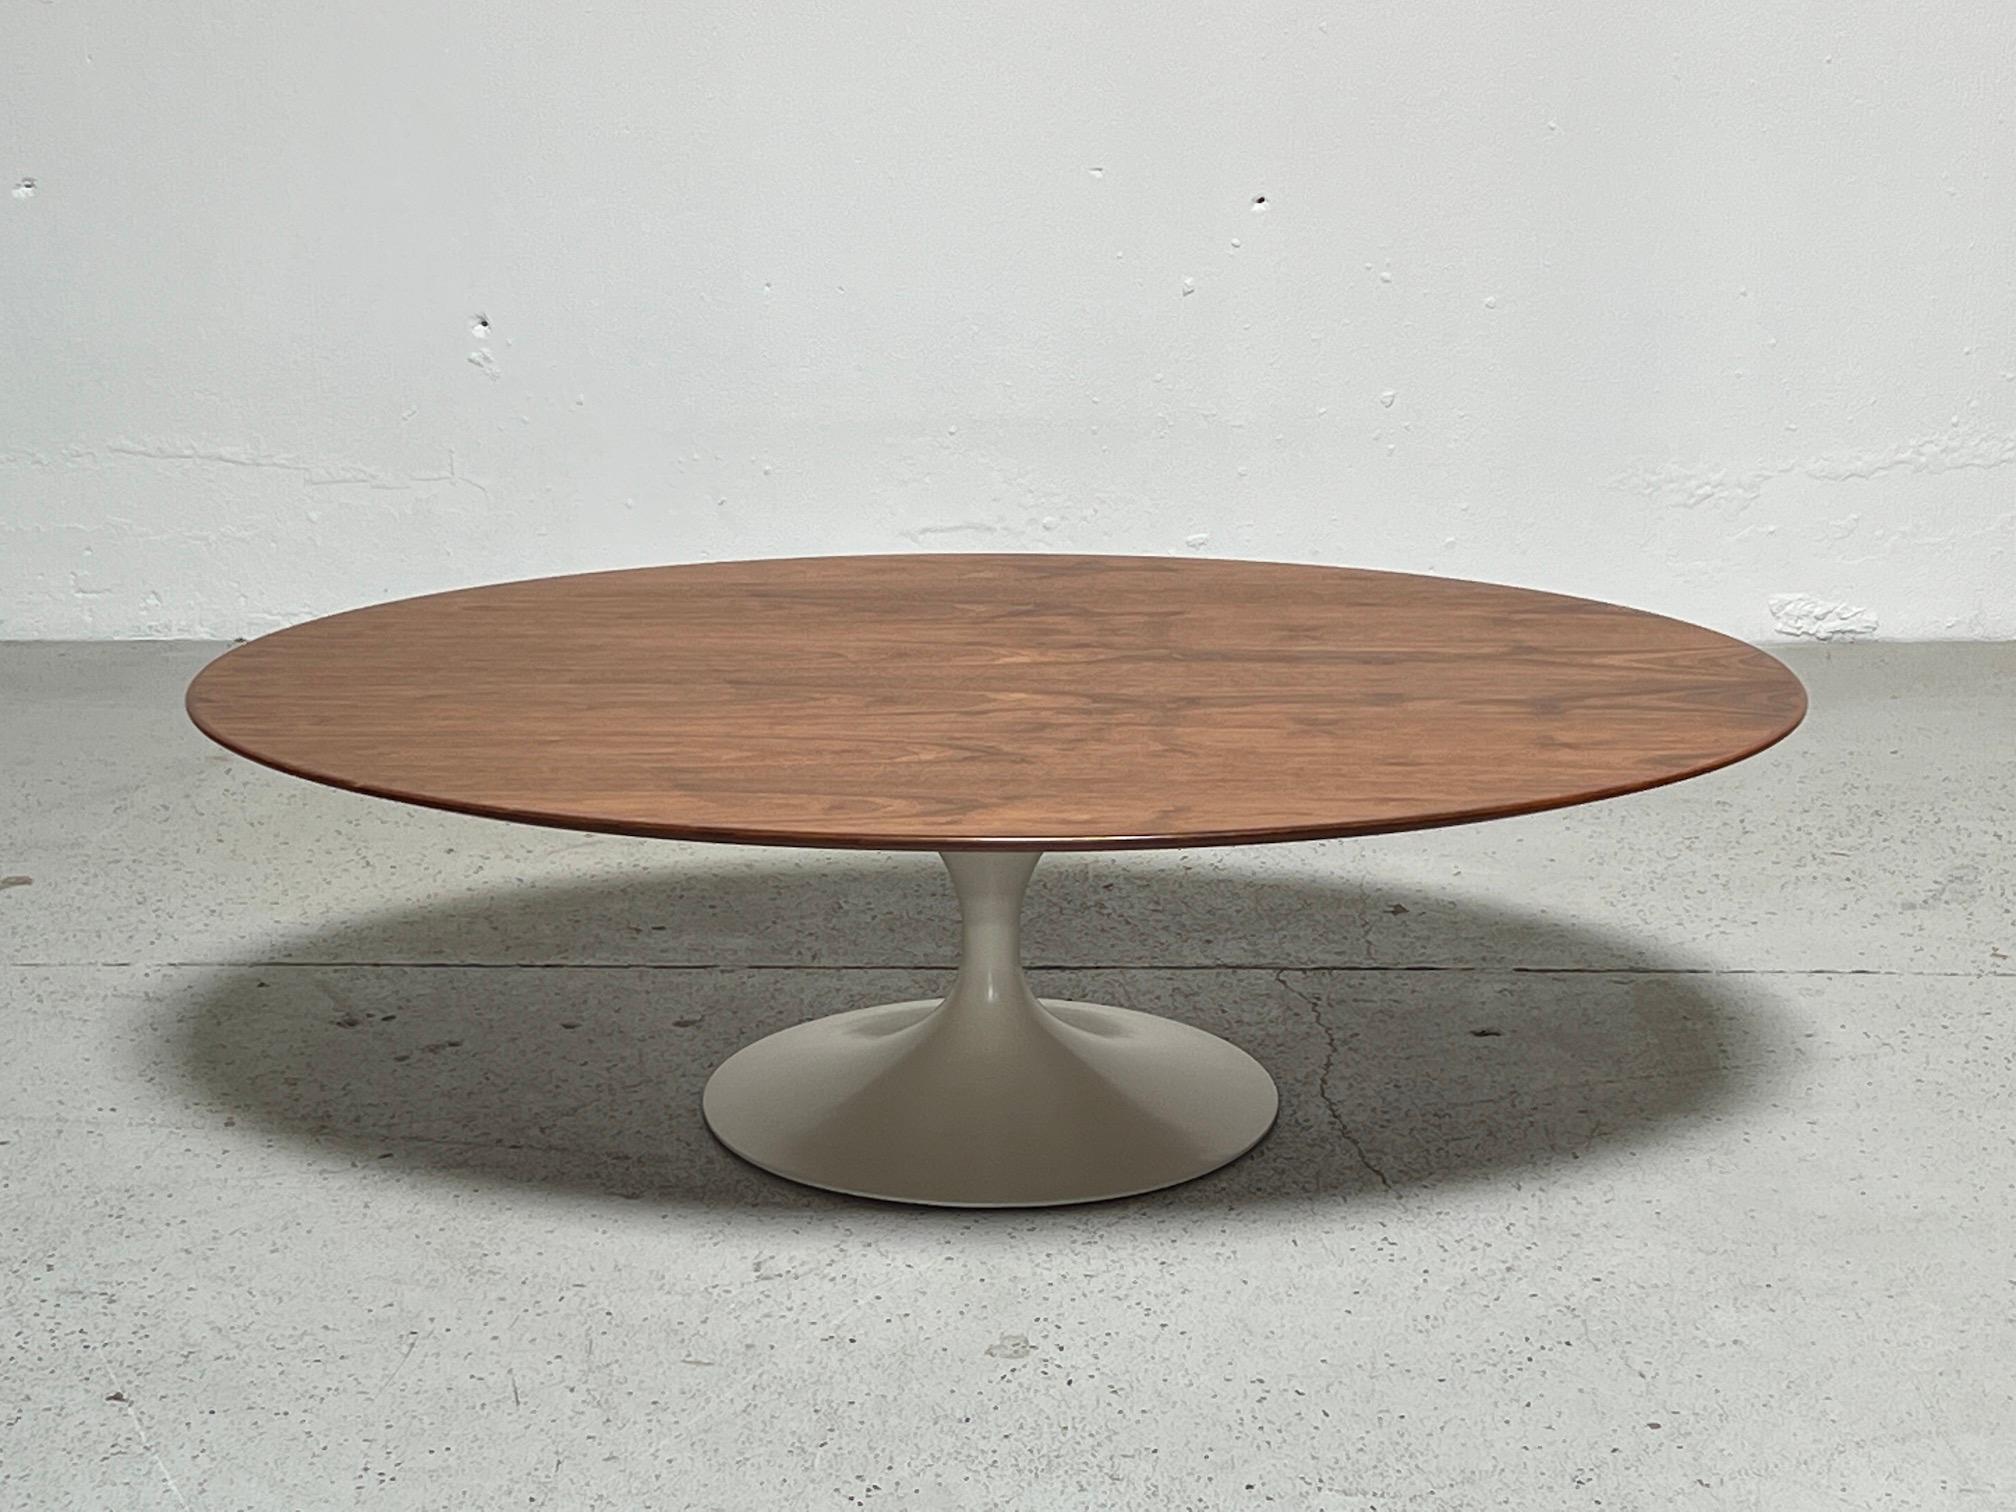 An early walnut topped tulip coffee table designed by Eero Saarinen for Knoll.